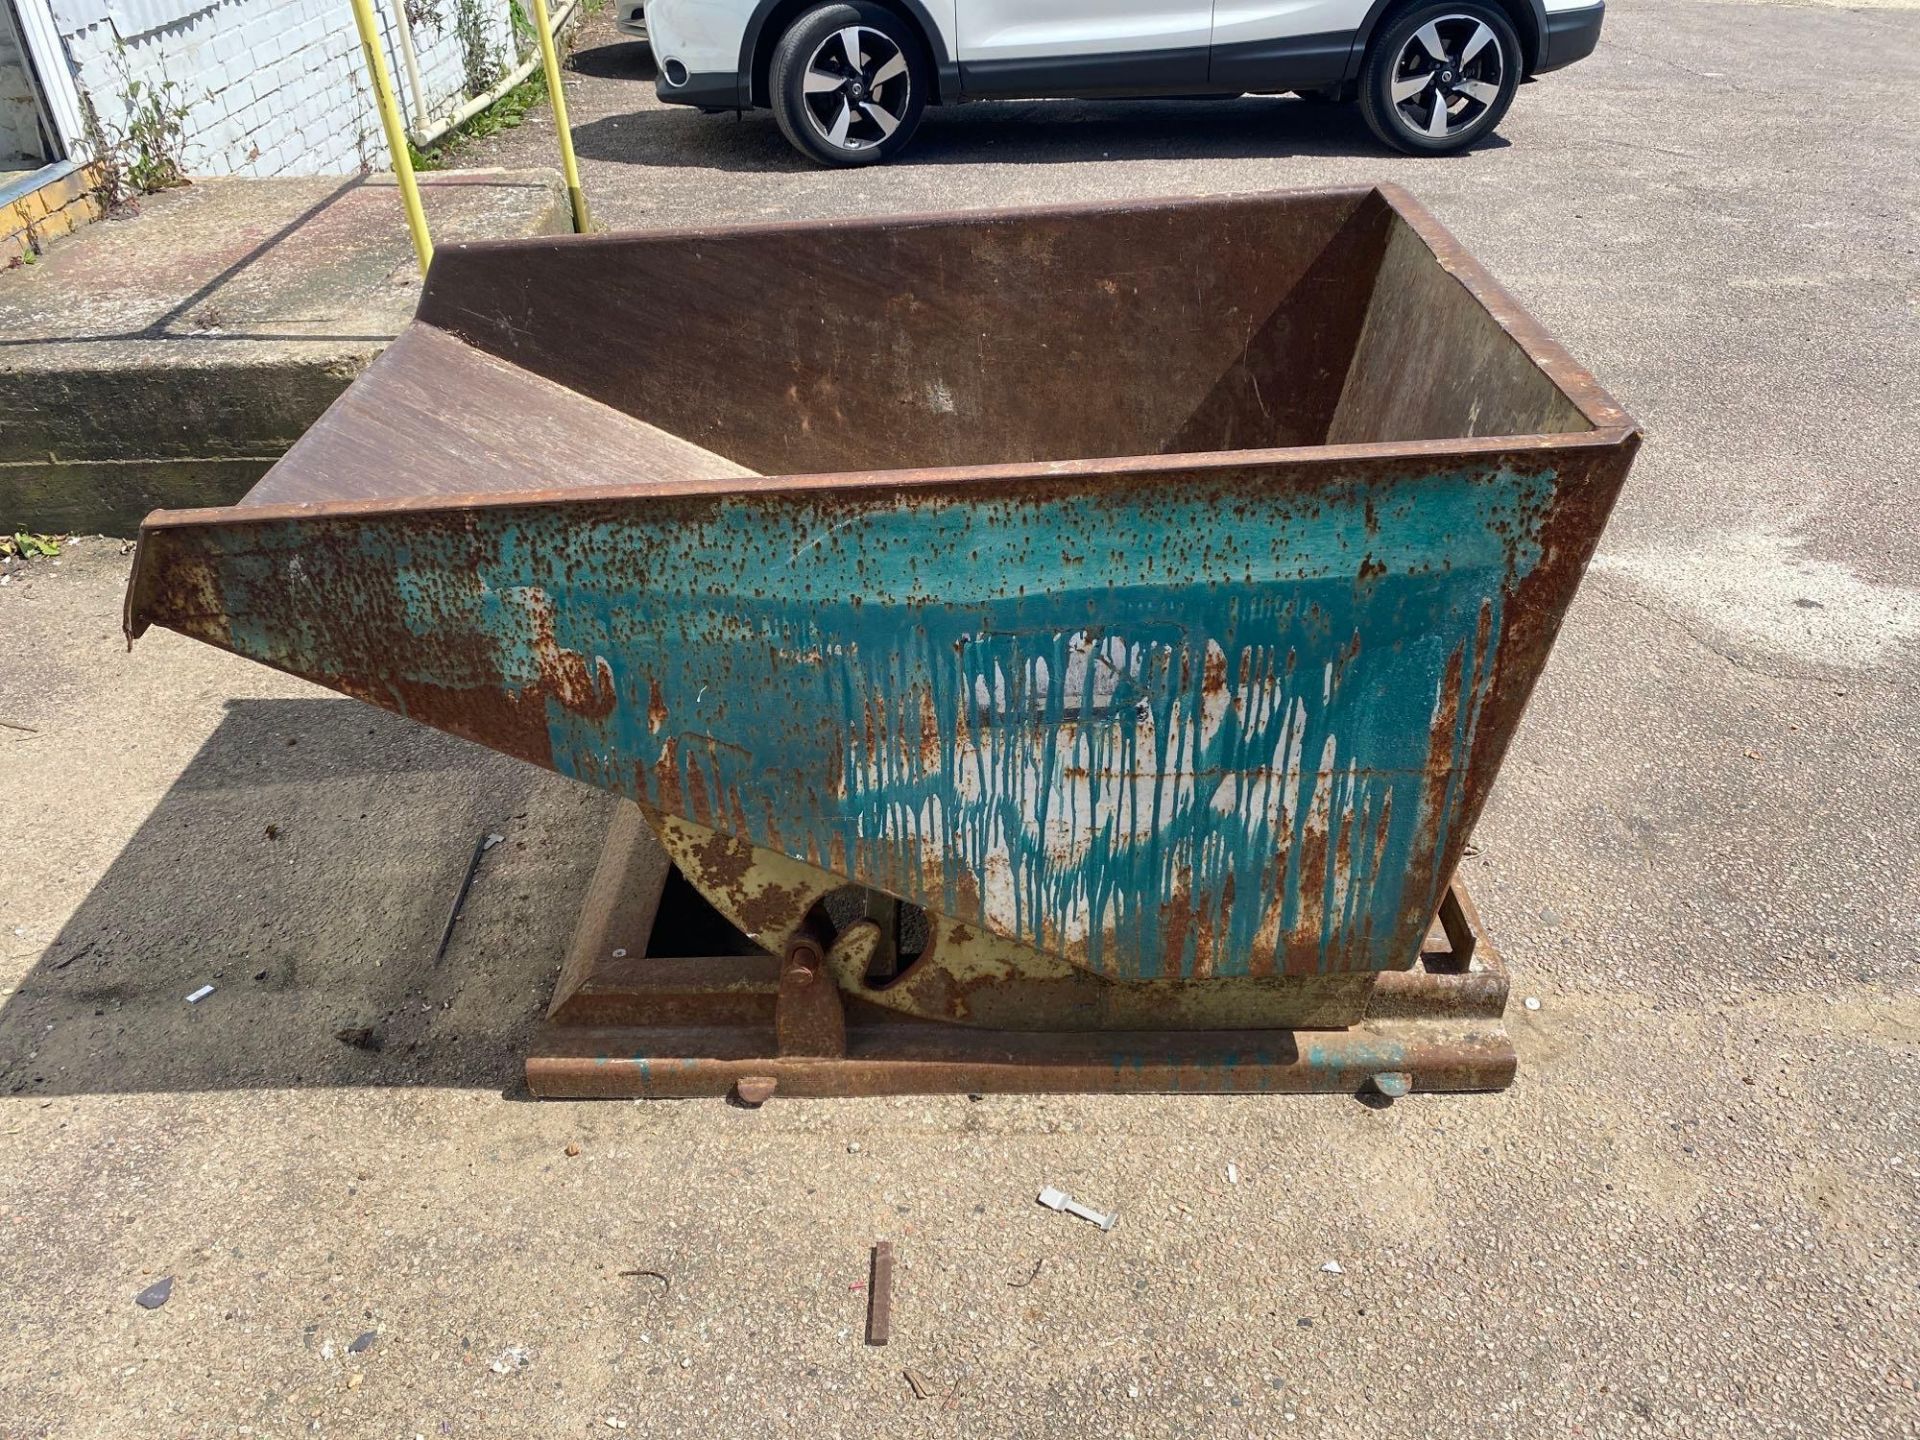 Fork Lift tipping skip - Image 2 of 2